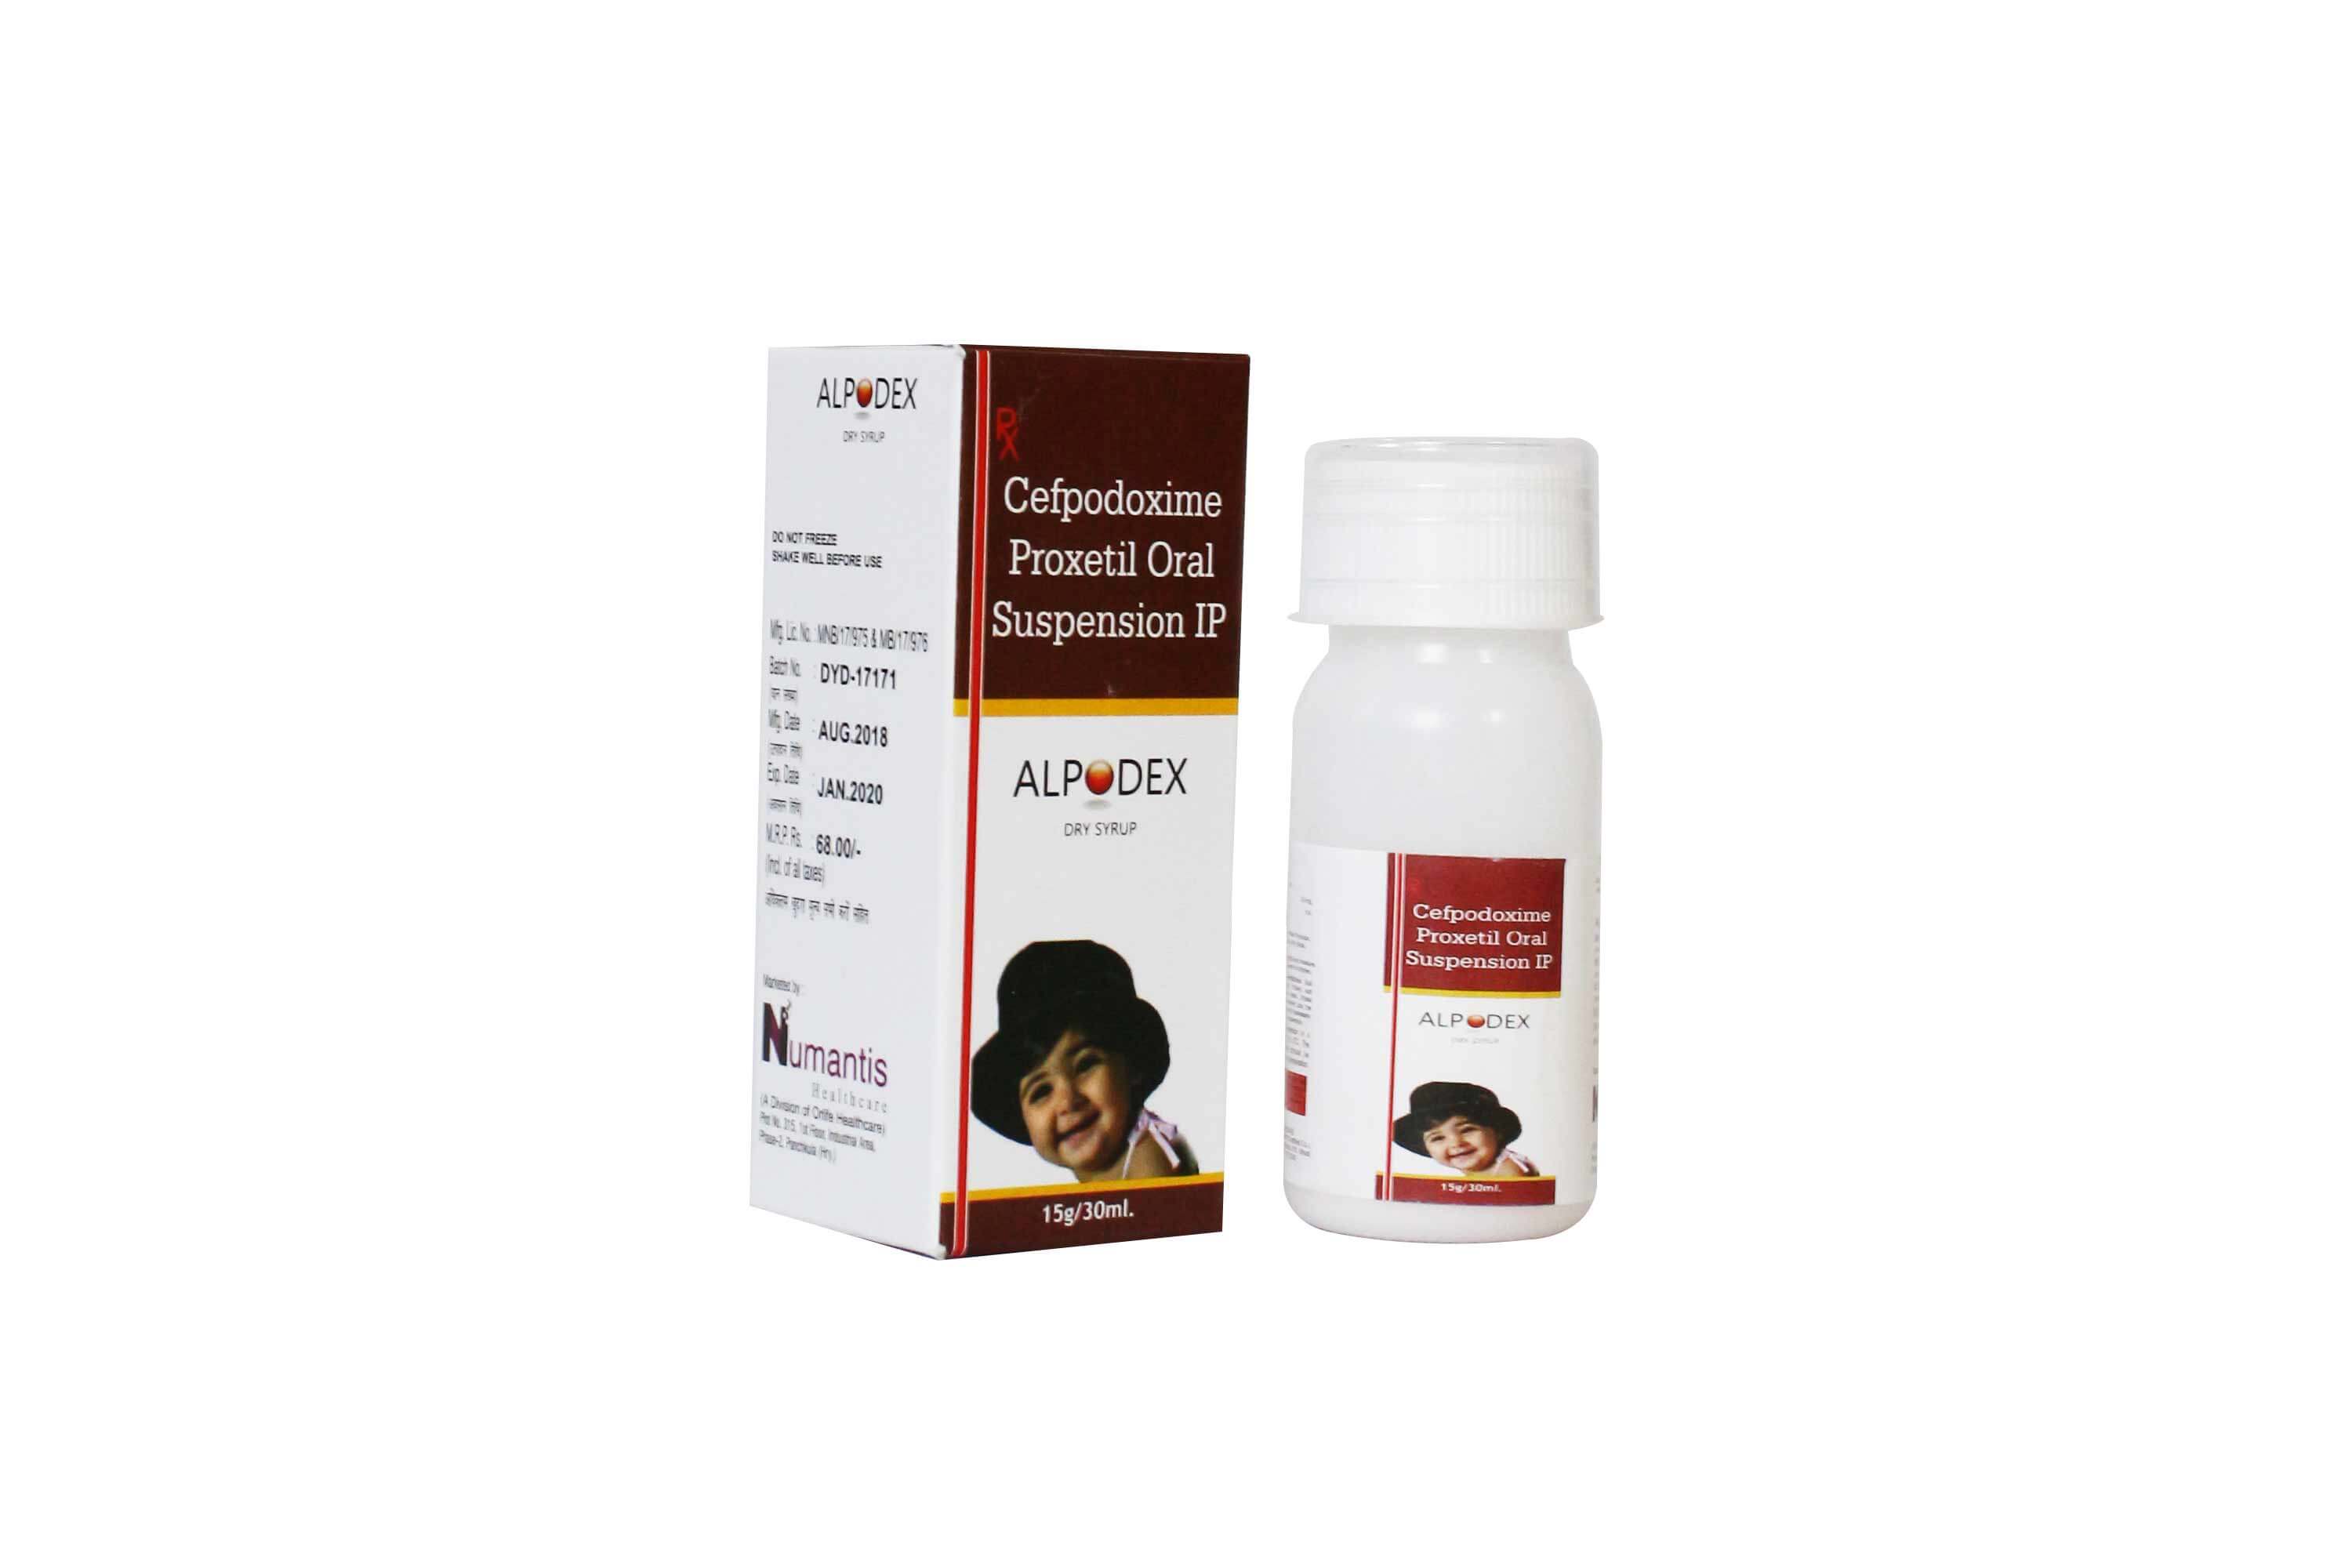 Product Name: Alpodex, Compositions of Alpodex are Cefpodoxime Proxetil Oral Suspension IP - Numantis Healthcare